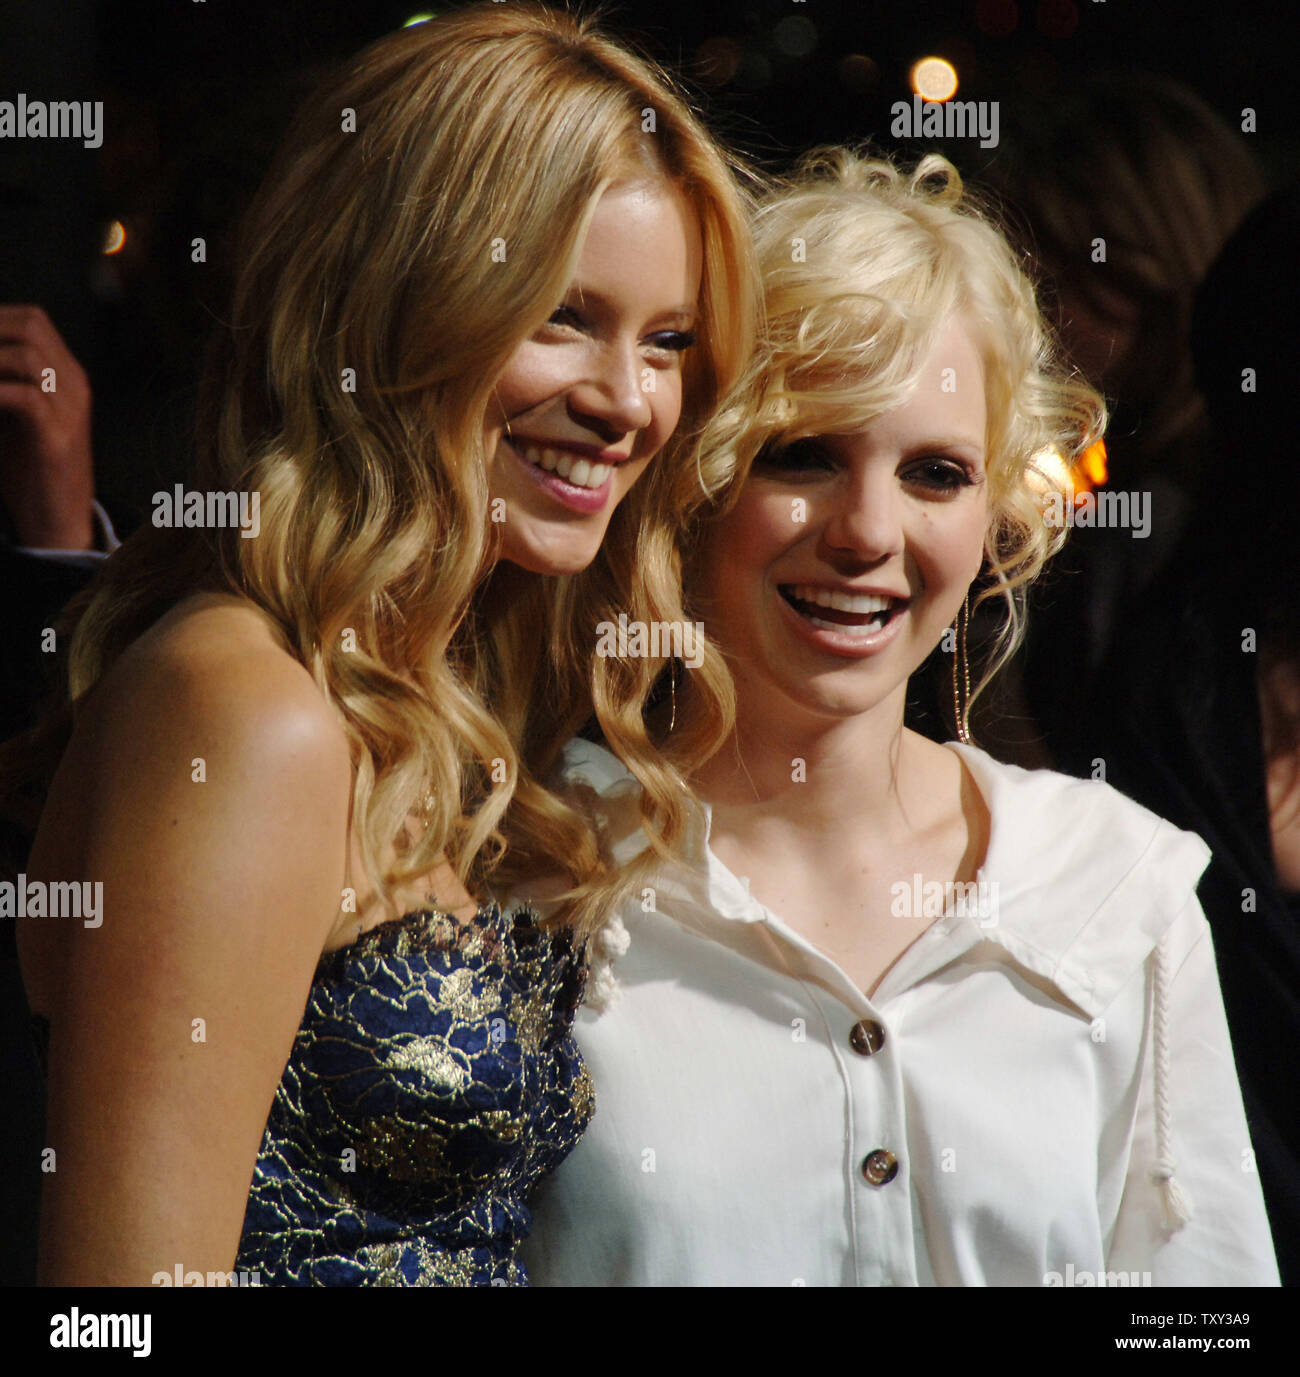 https://c8.alamy.com/comp/TXY3A9/actresses-amy-smart-l-and-anna-faris-cast-members-in-the-romantic-comedy-motion-picture-just-friends-arrive-for-the-premiere-of-the-film-in-the-westwood-section-of-los-angeles-november-14-2005-upi-photojim-ruymen-TXY3A9.jpg